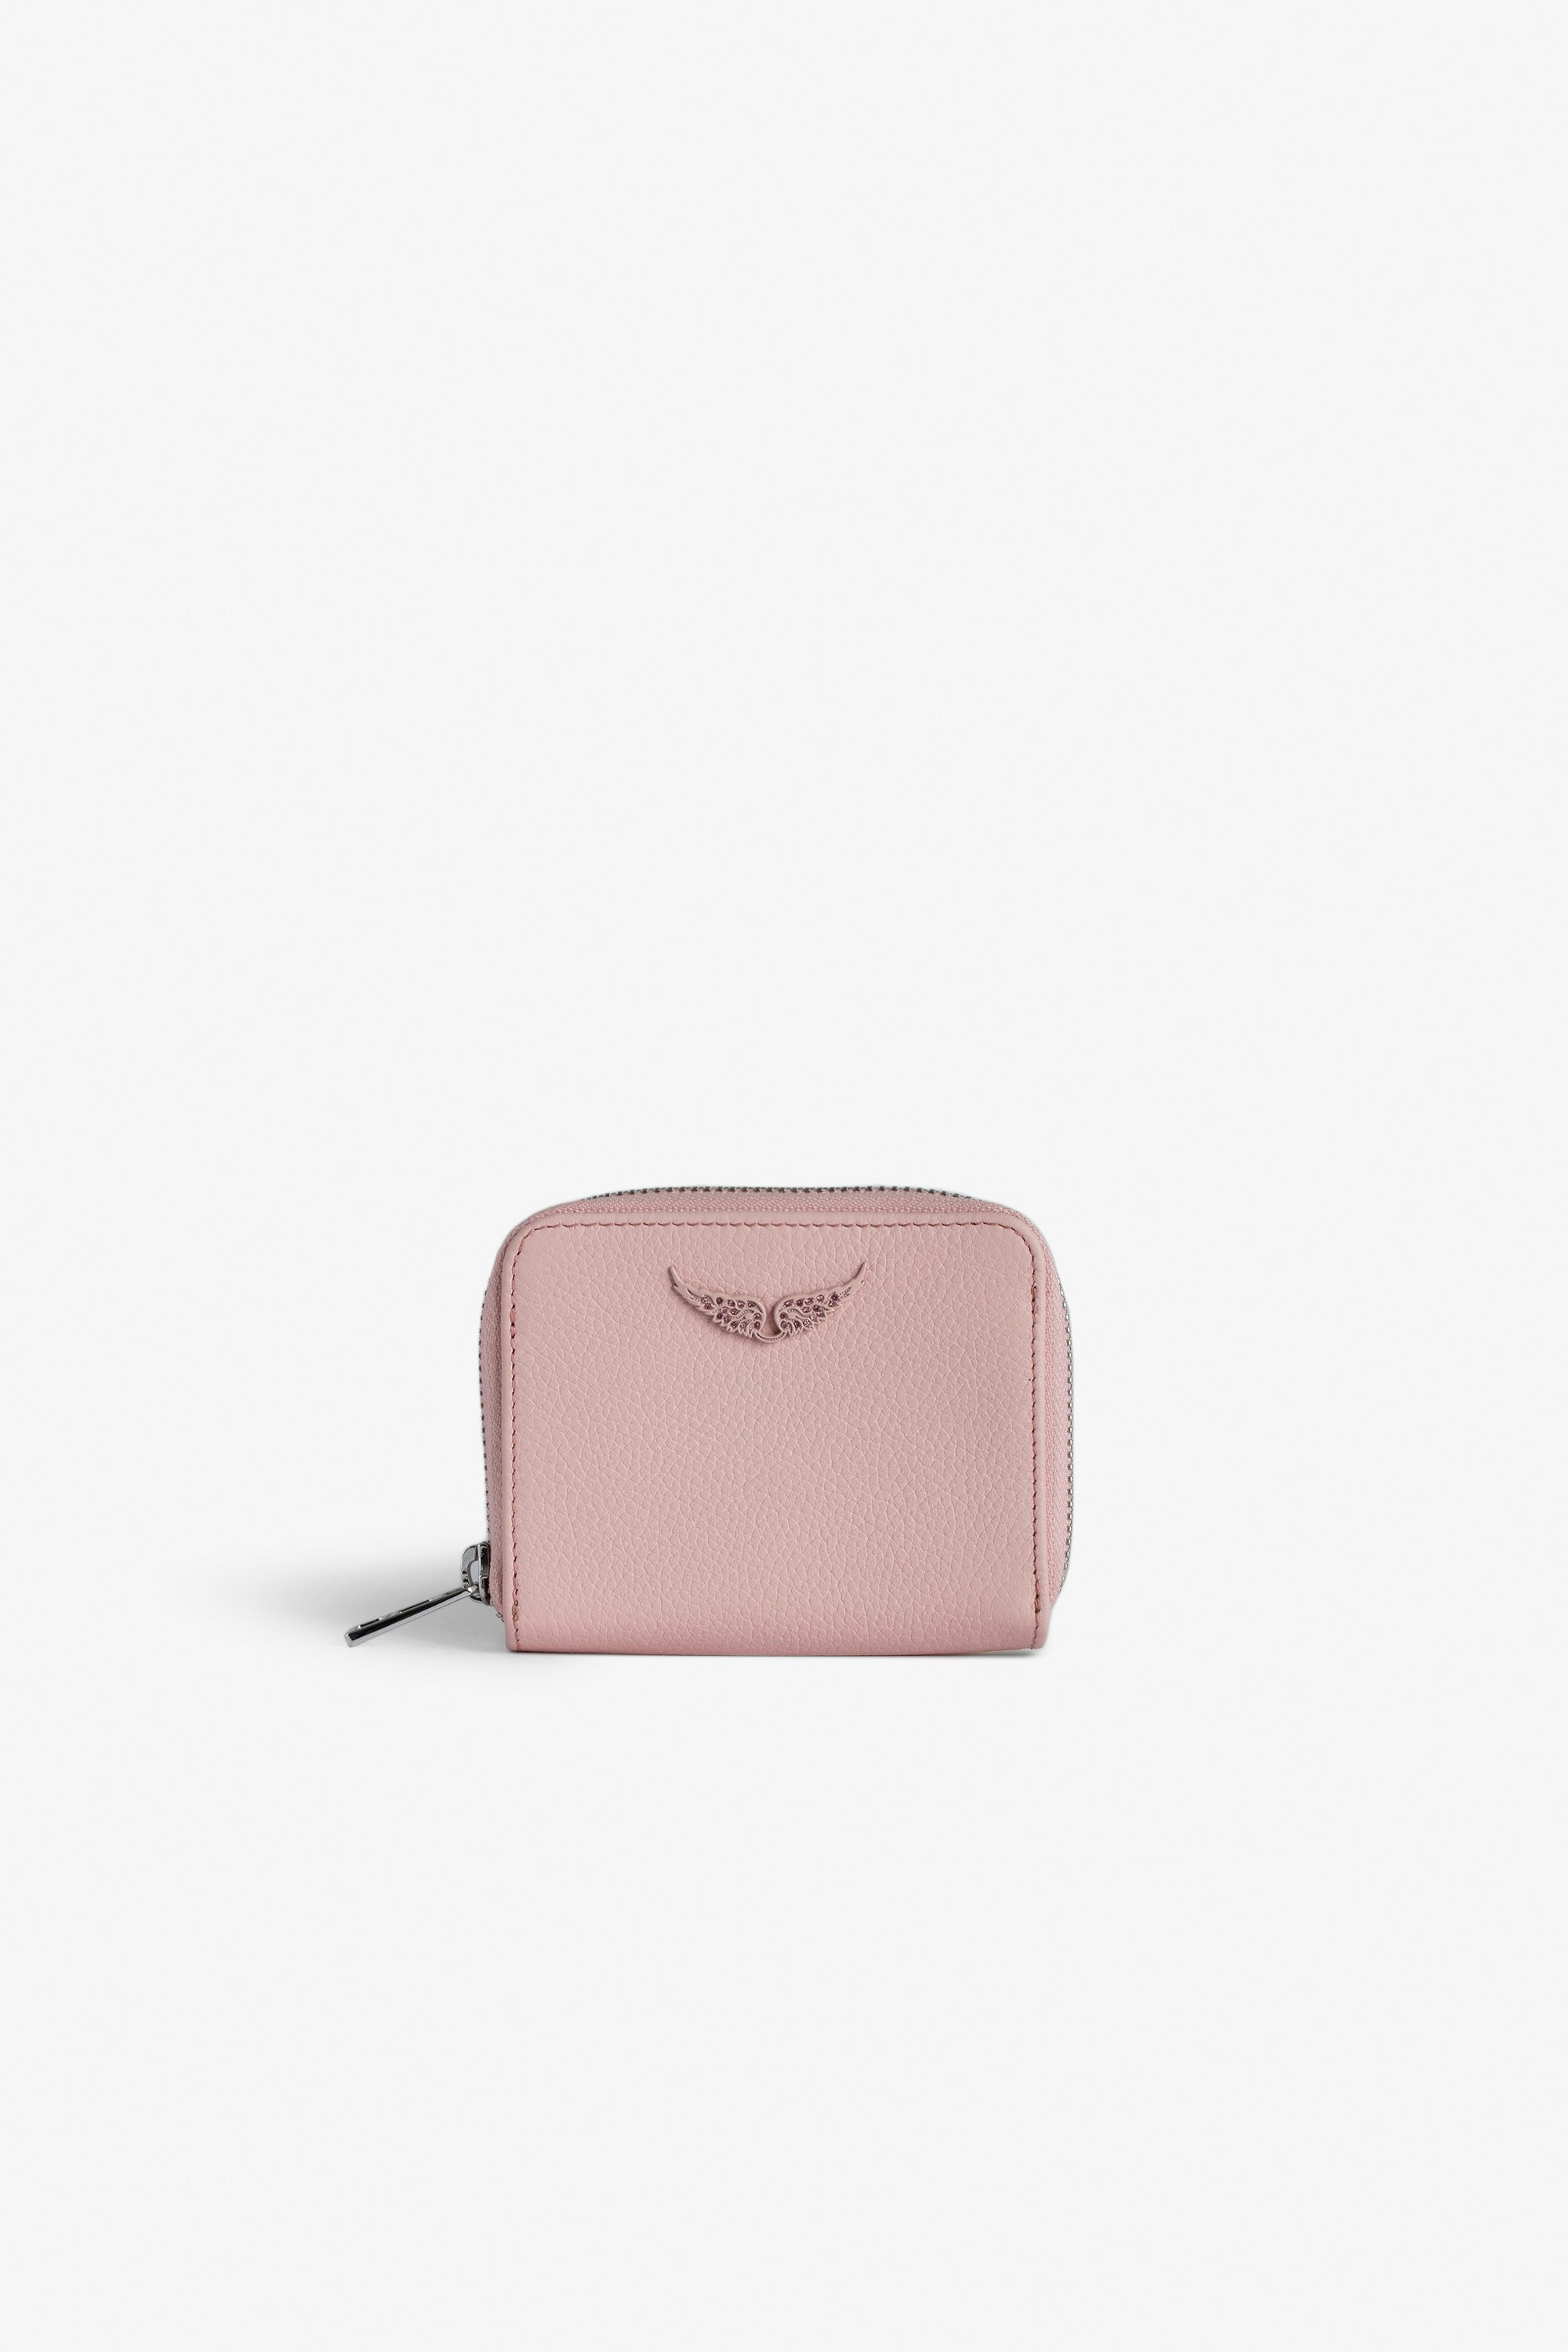 Mini ZV Coin 財布 - Women’s pink grained leather wallet with diamanté wings charm.